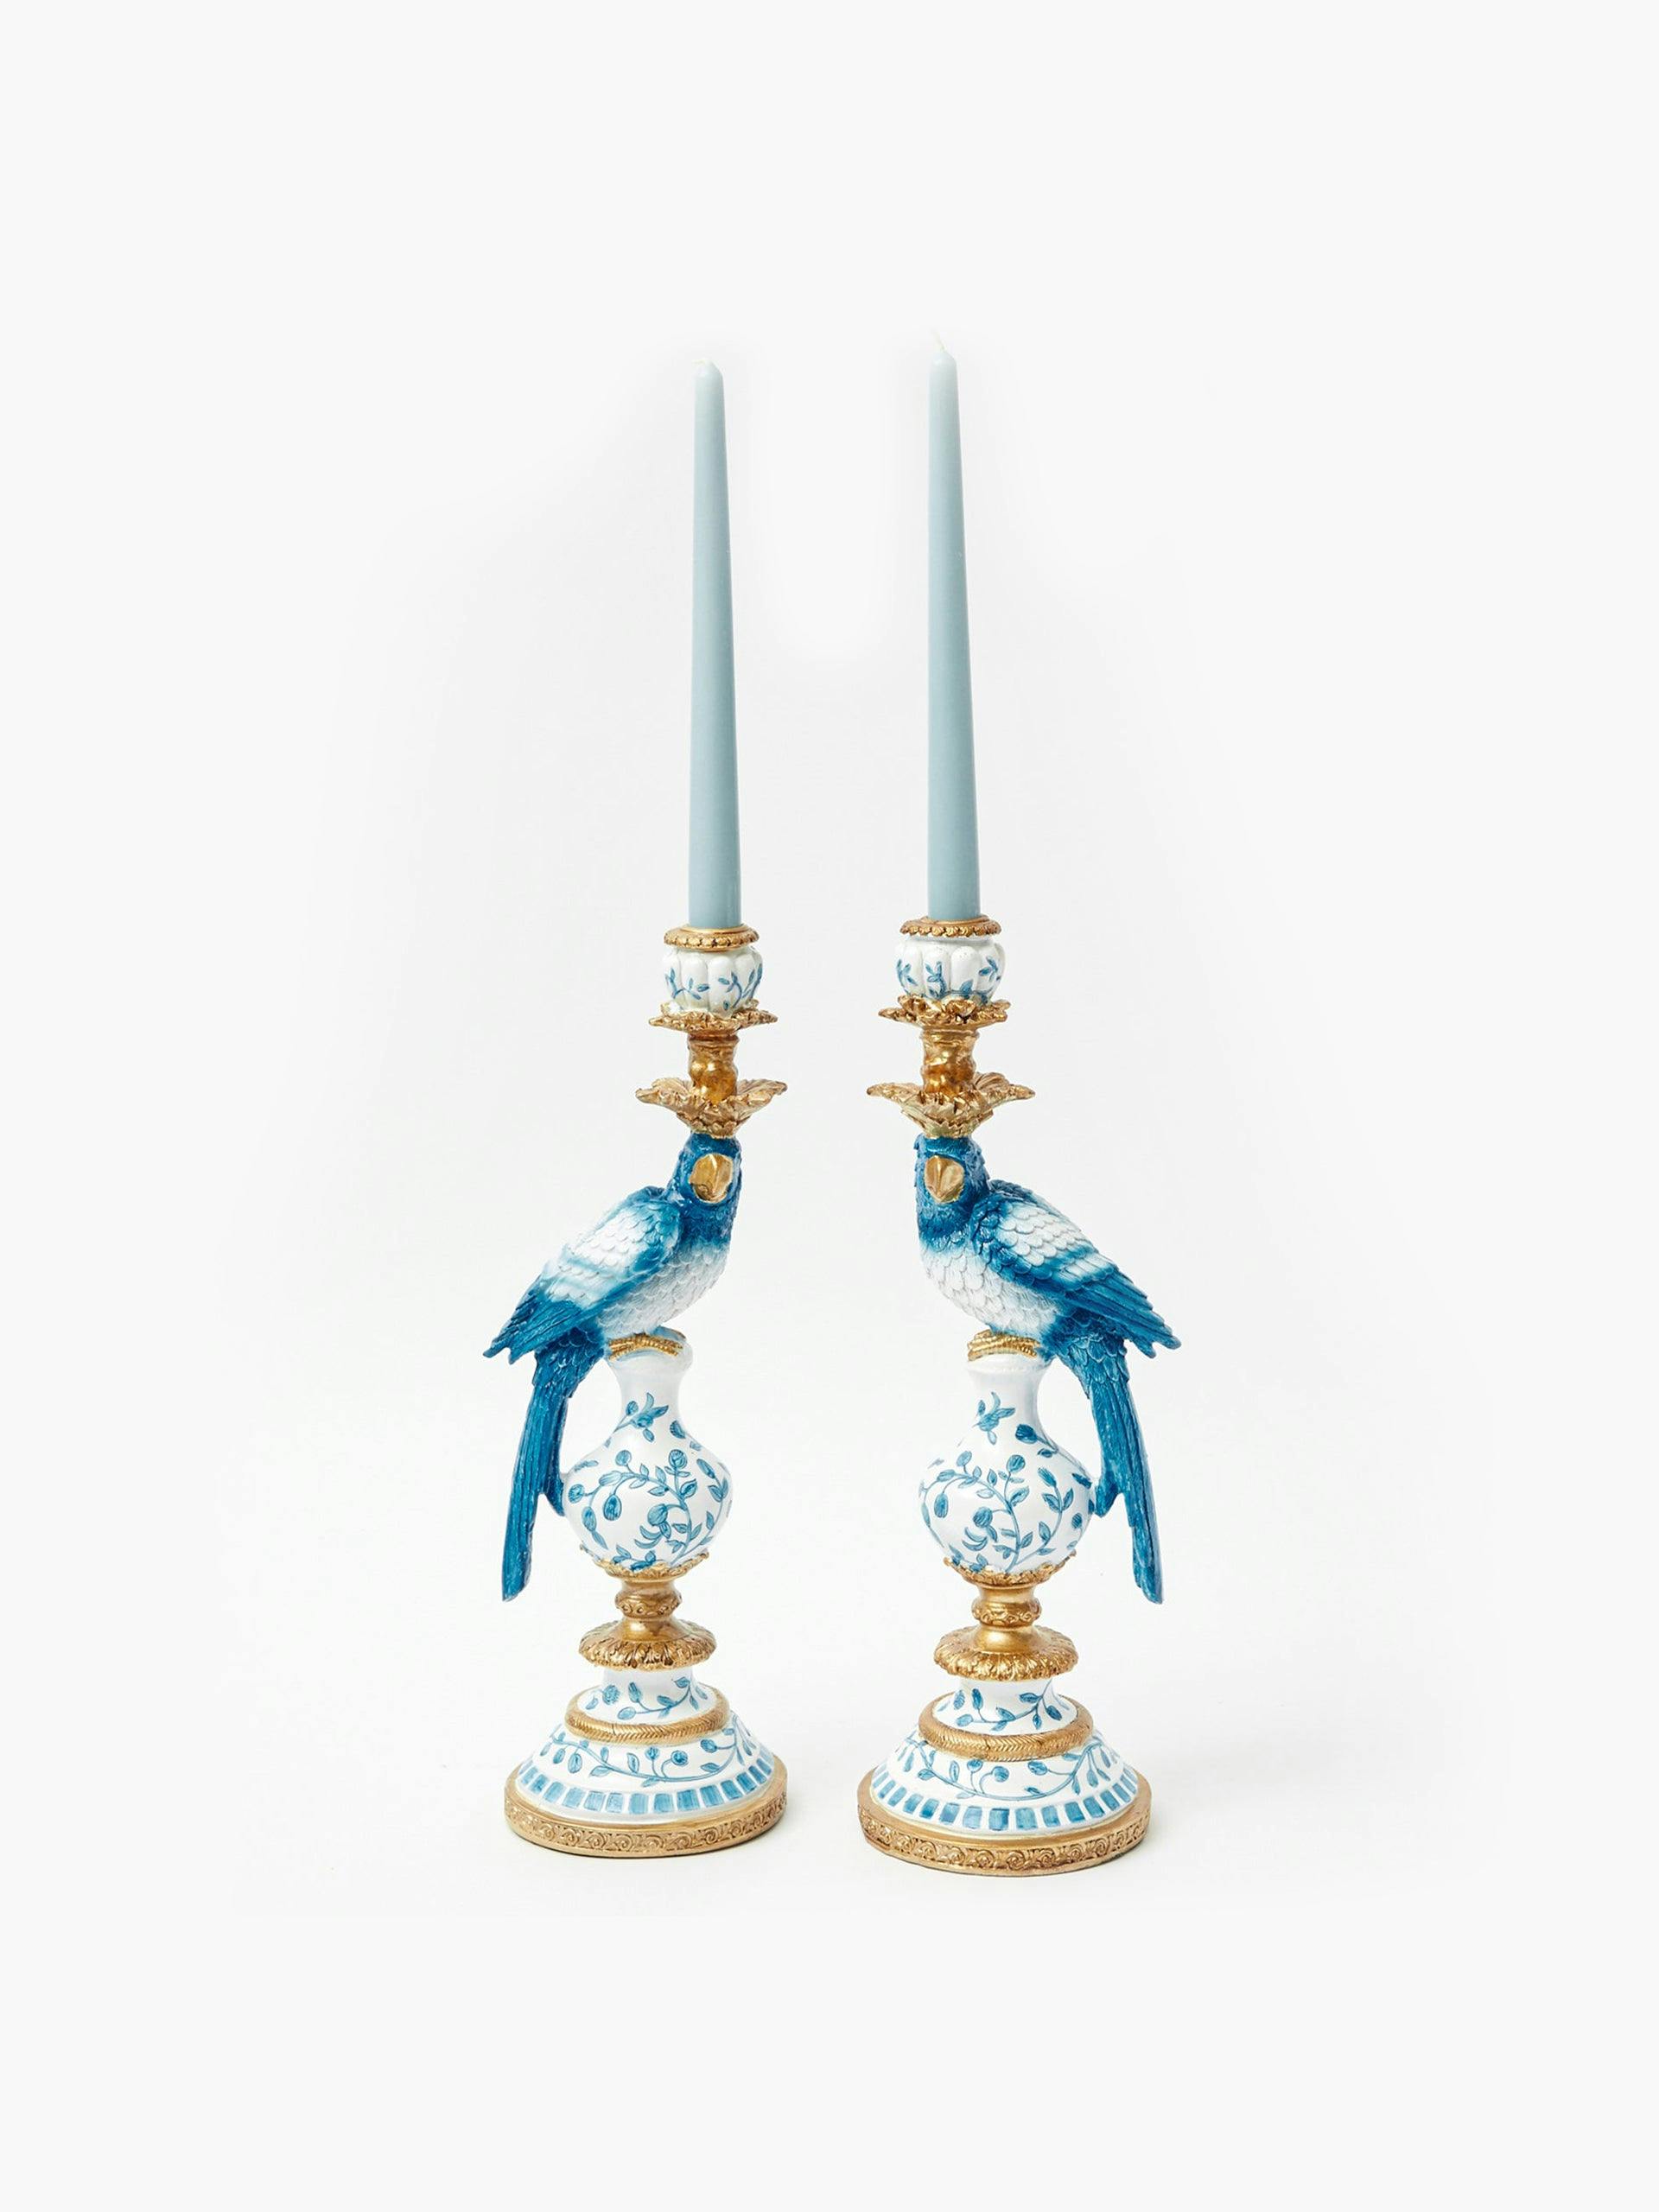 Blue Parrot candle holders (set of 2)